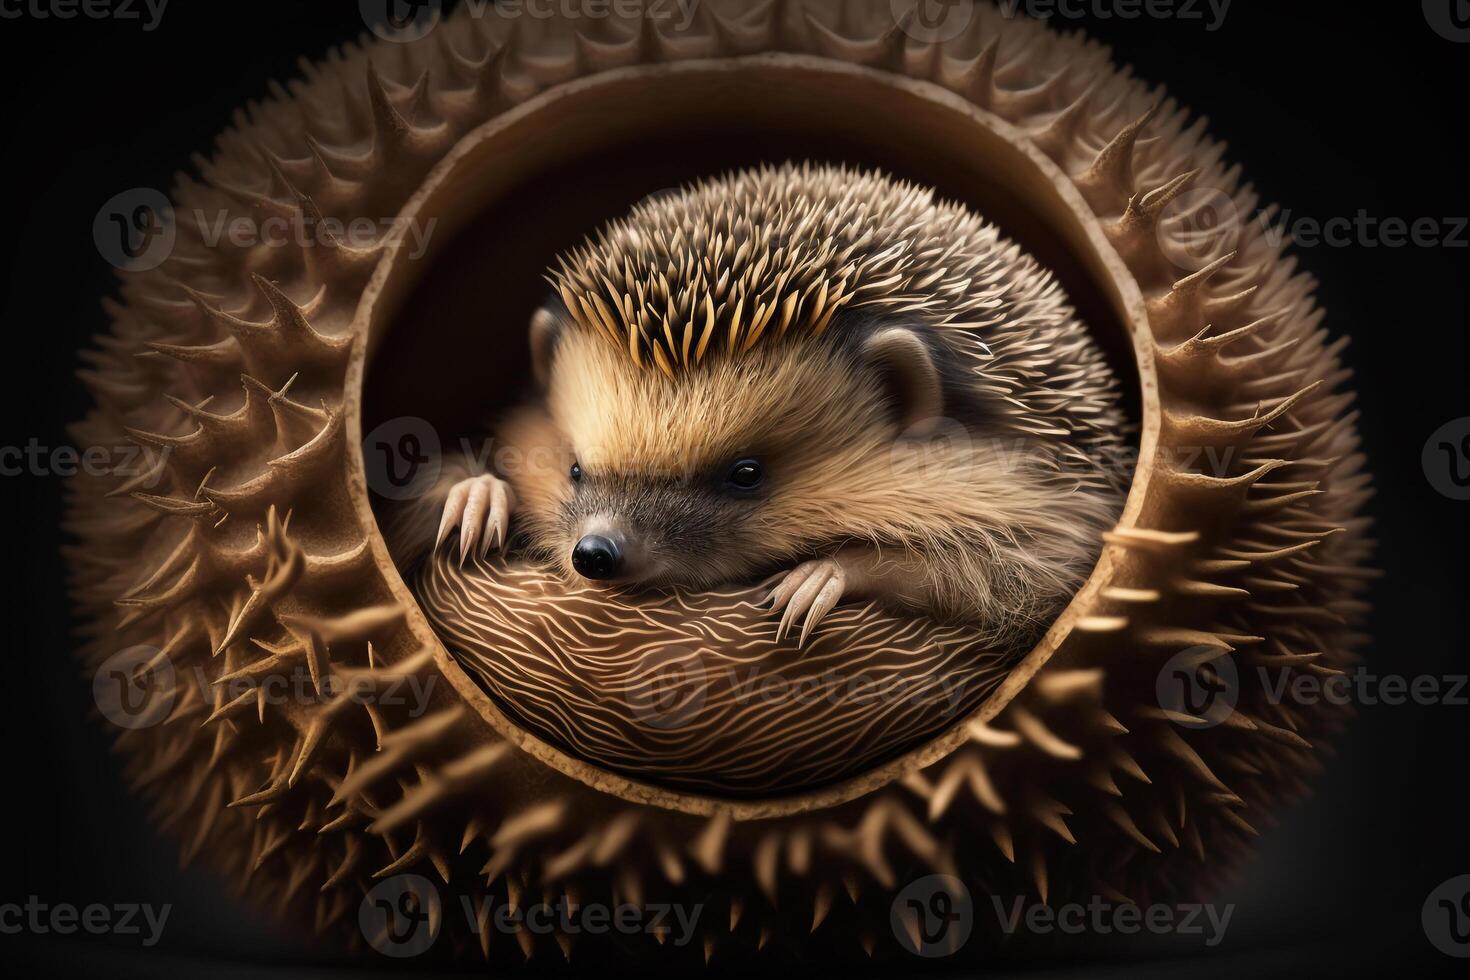 a tiny hedgehog curled up in a ball, with its spines sticking out all around. photo